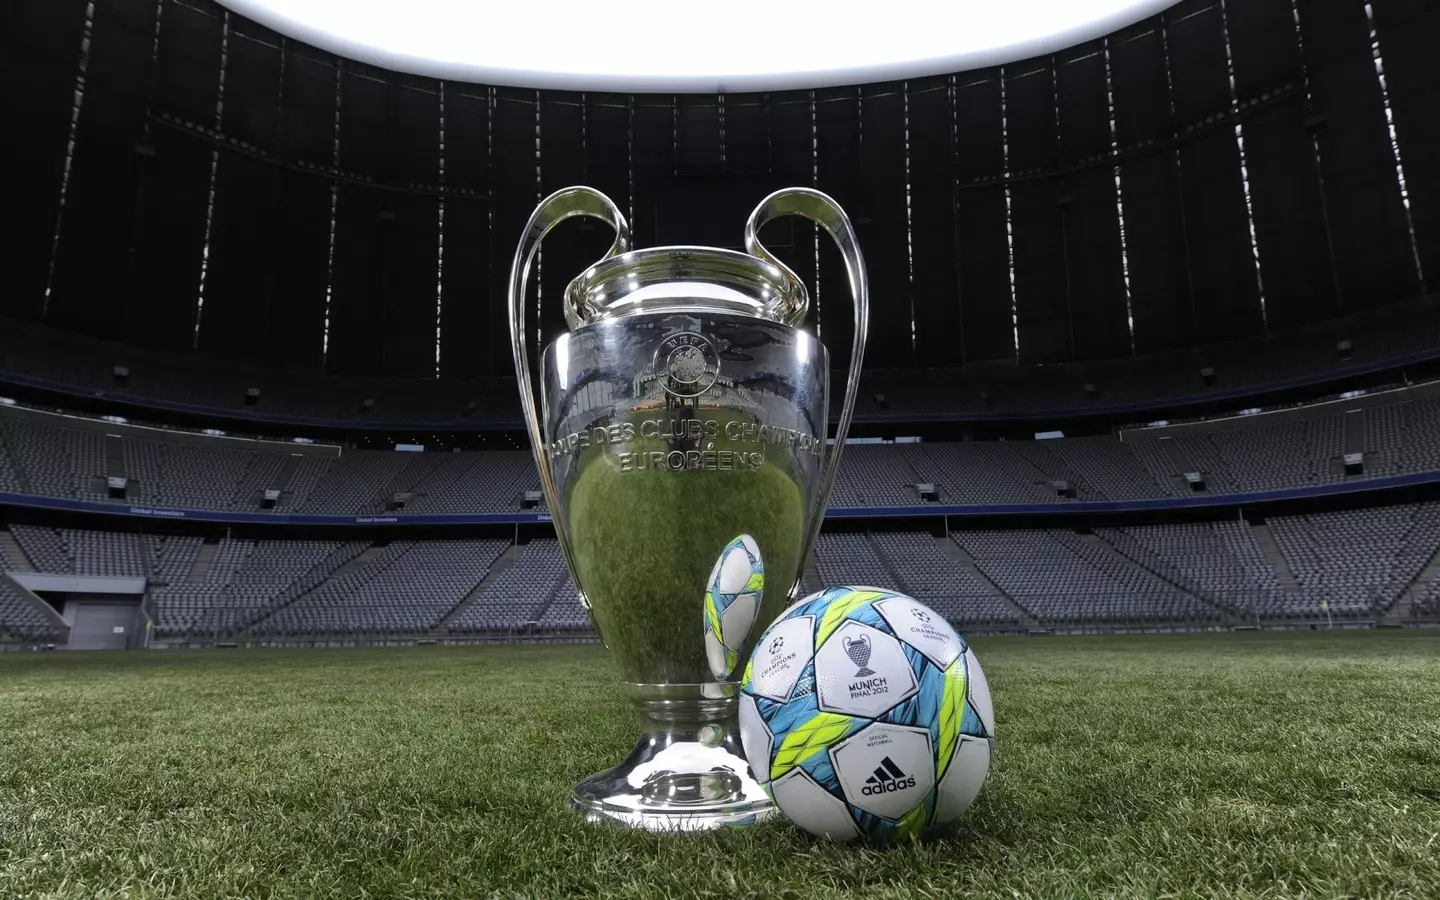 UEFA Champions League trophy and official match ball on the pitch of Allianz Arena in Munich, Germany. (Alamy)